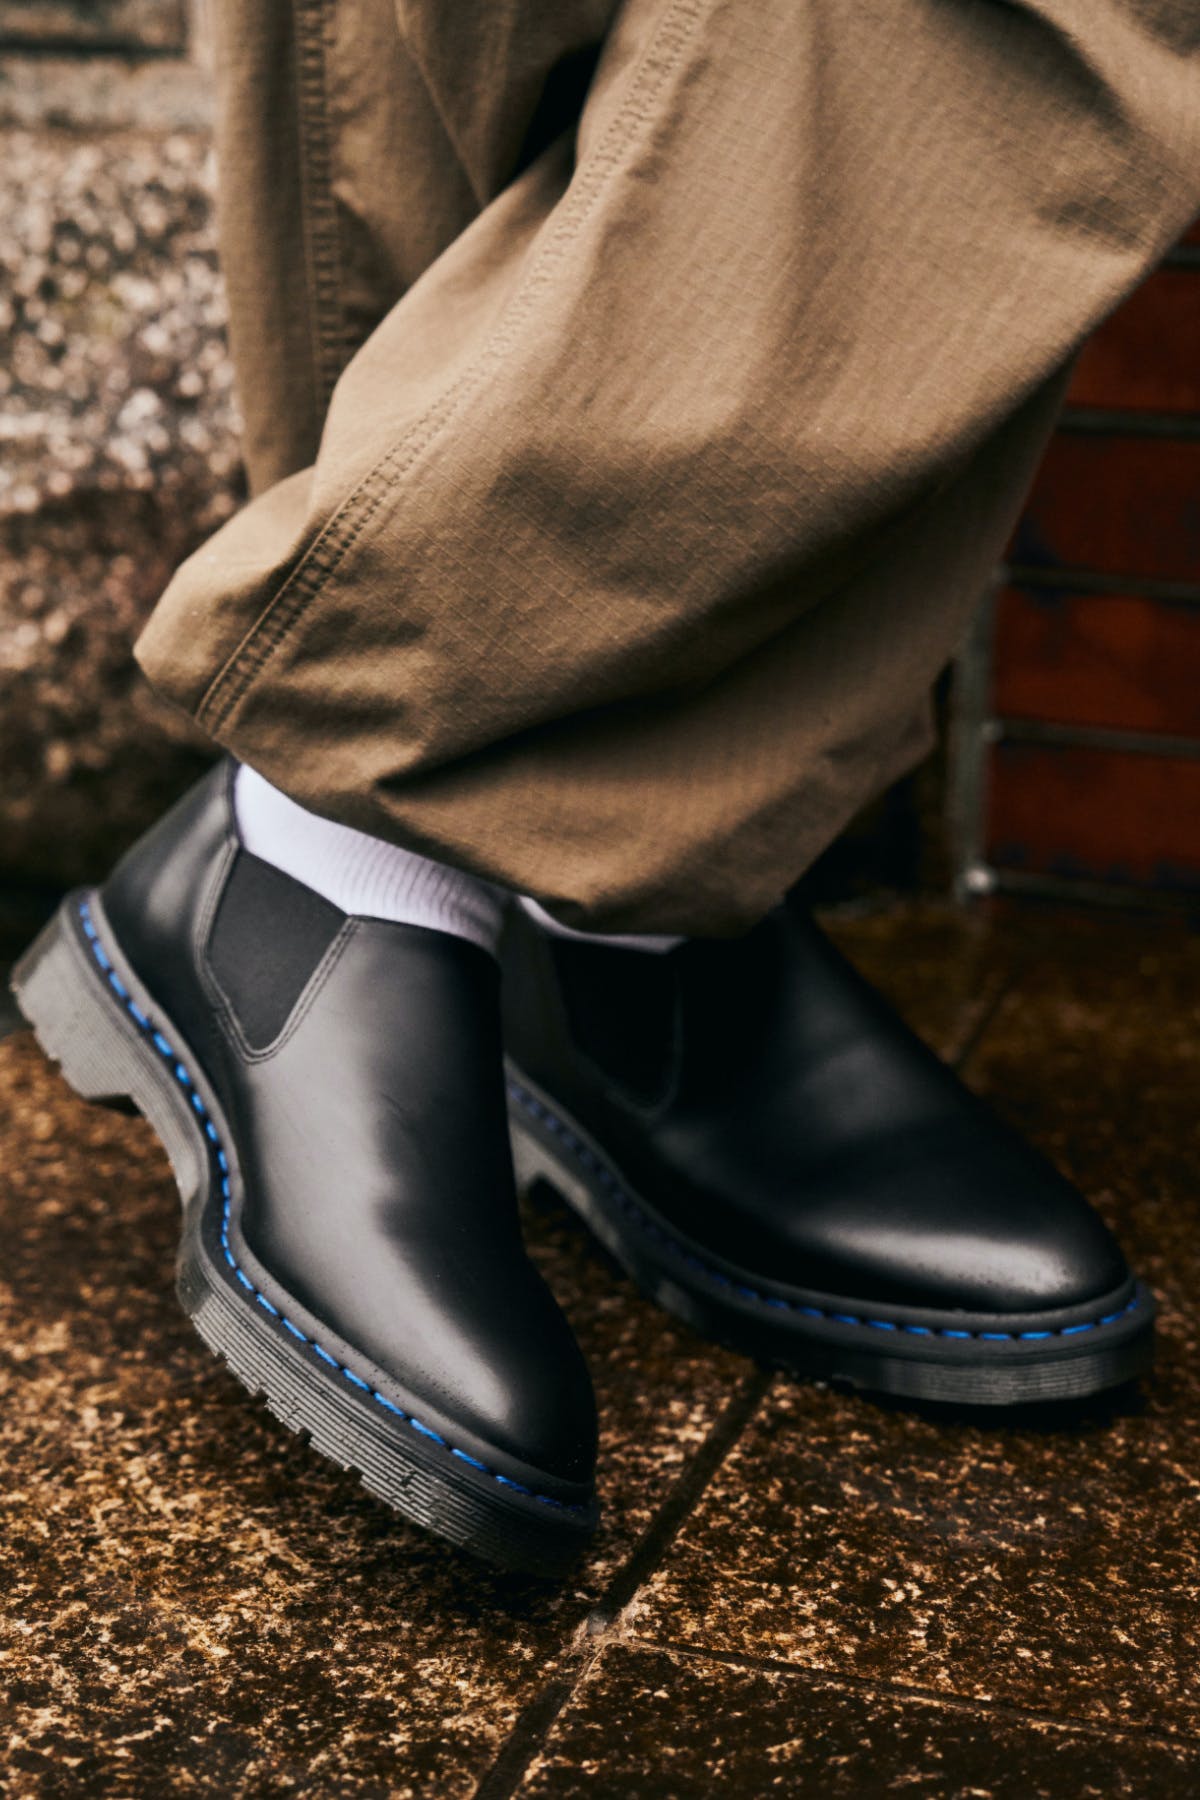 highsnobiety on X: nanamica x Dr. Martens Chelsea Boots &